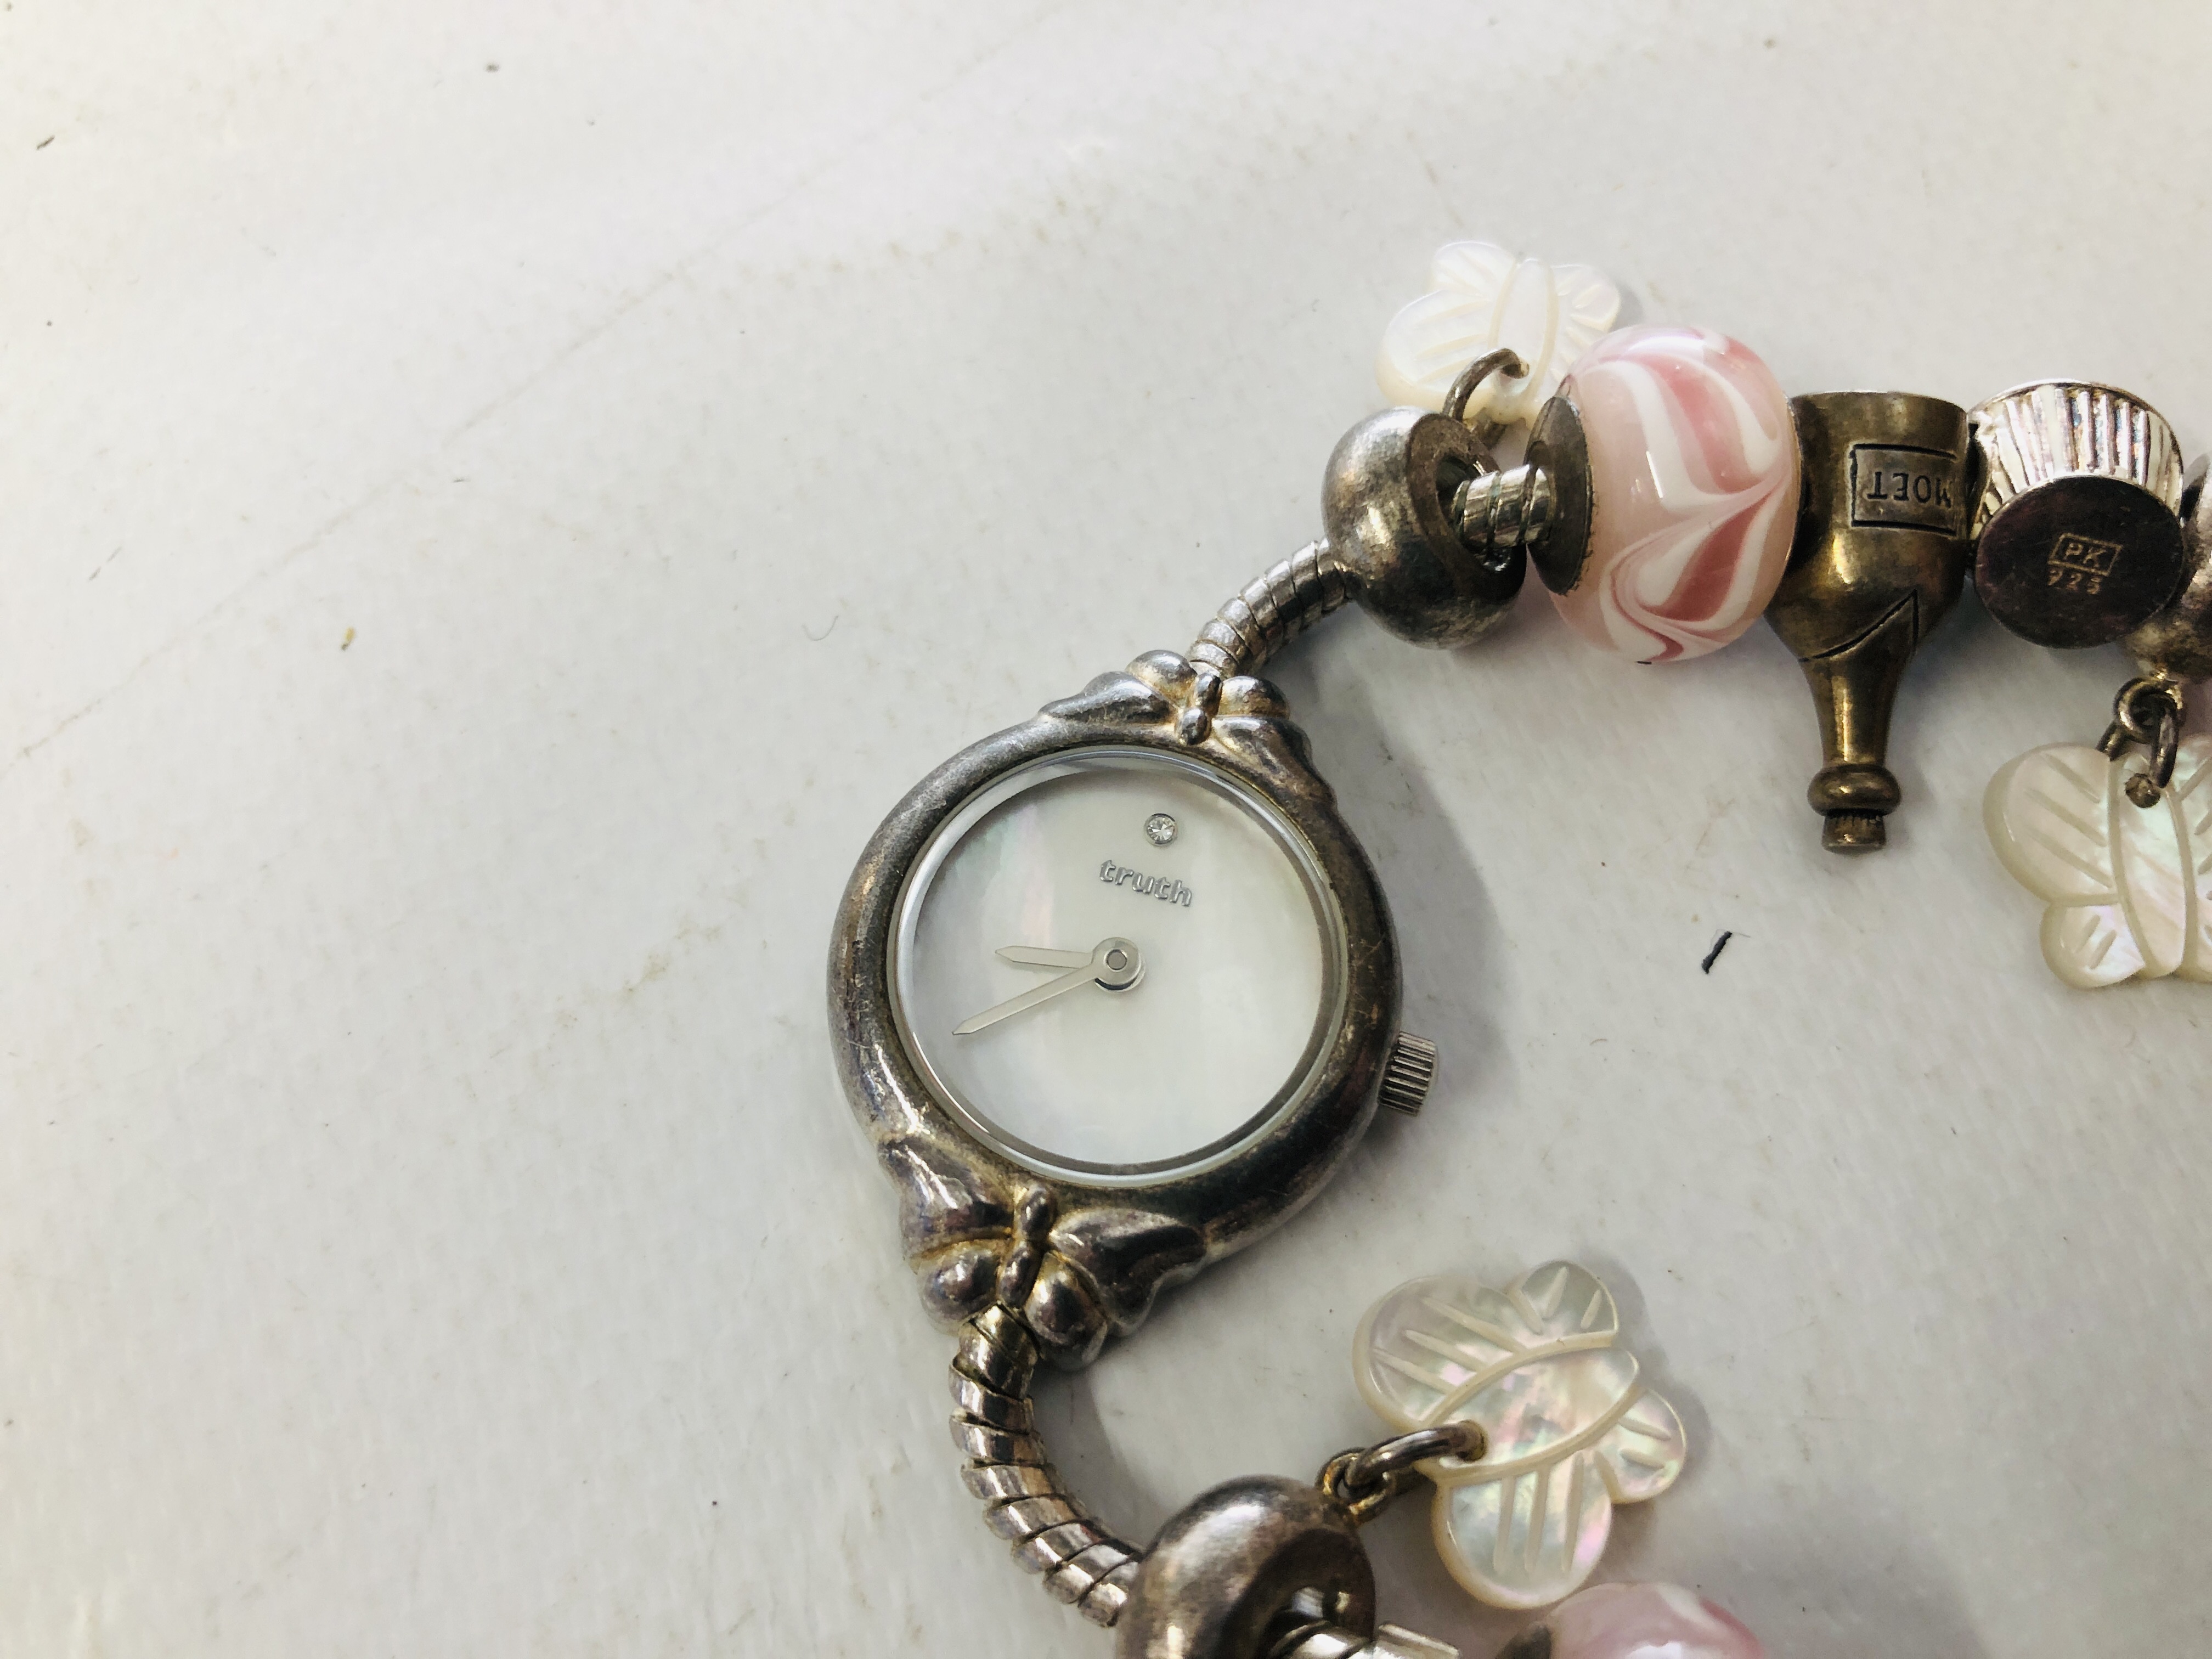 SILVER .925 "TRUTH" BRACELET WITH CHARMS AND WATCH ATTACHED. - Image 4 of 6